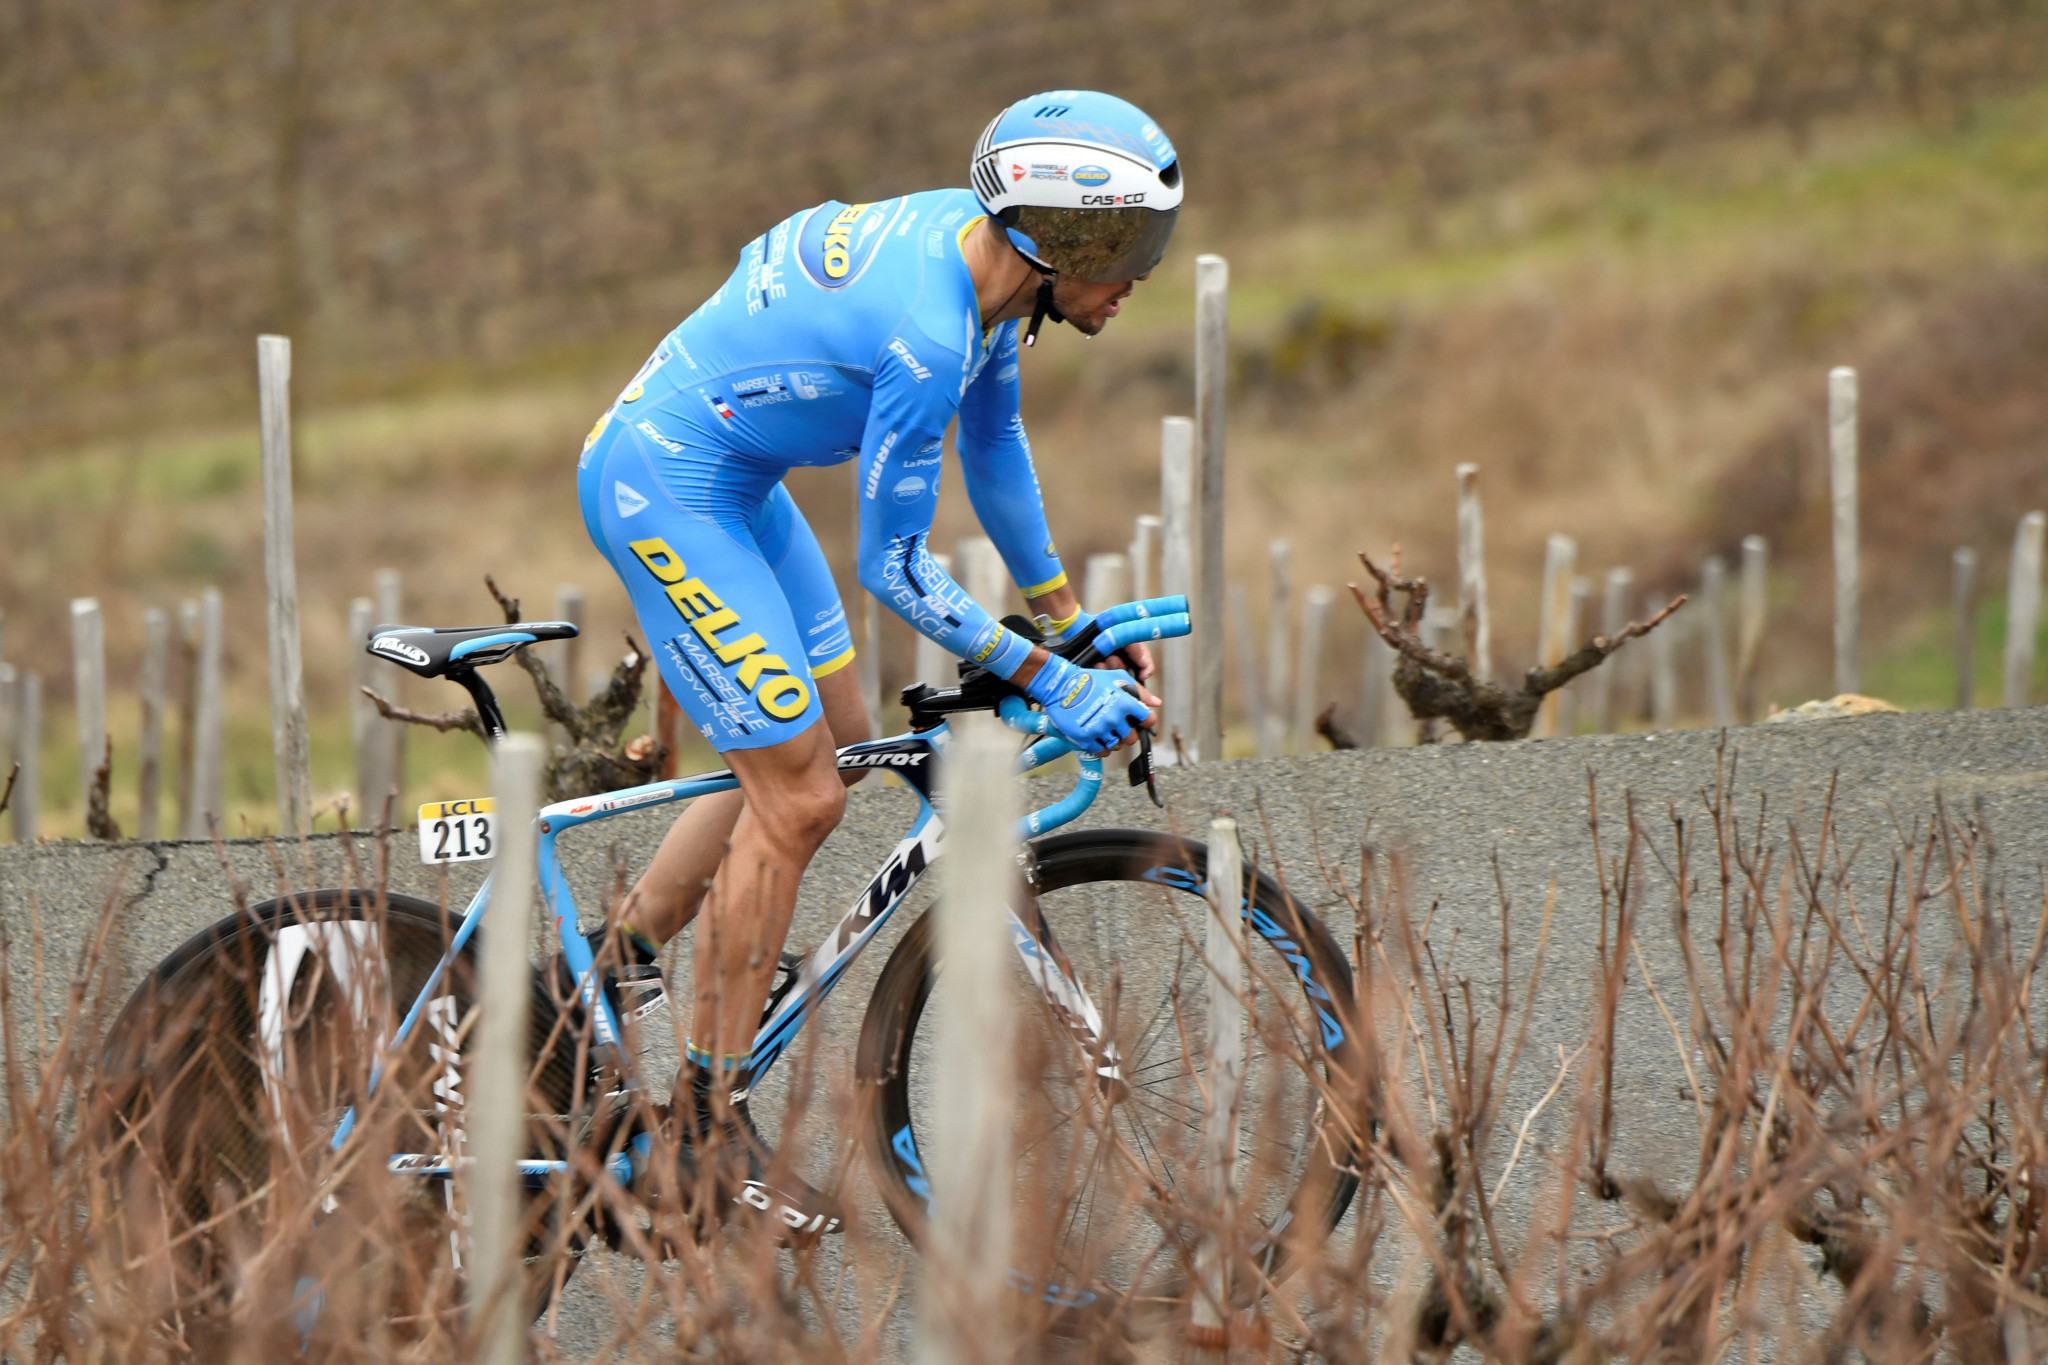 Di Gregorio suspended as UCI announce positive test for form of erythropoietin